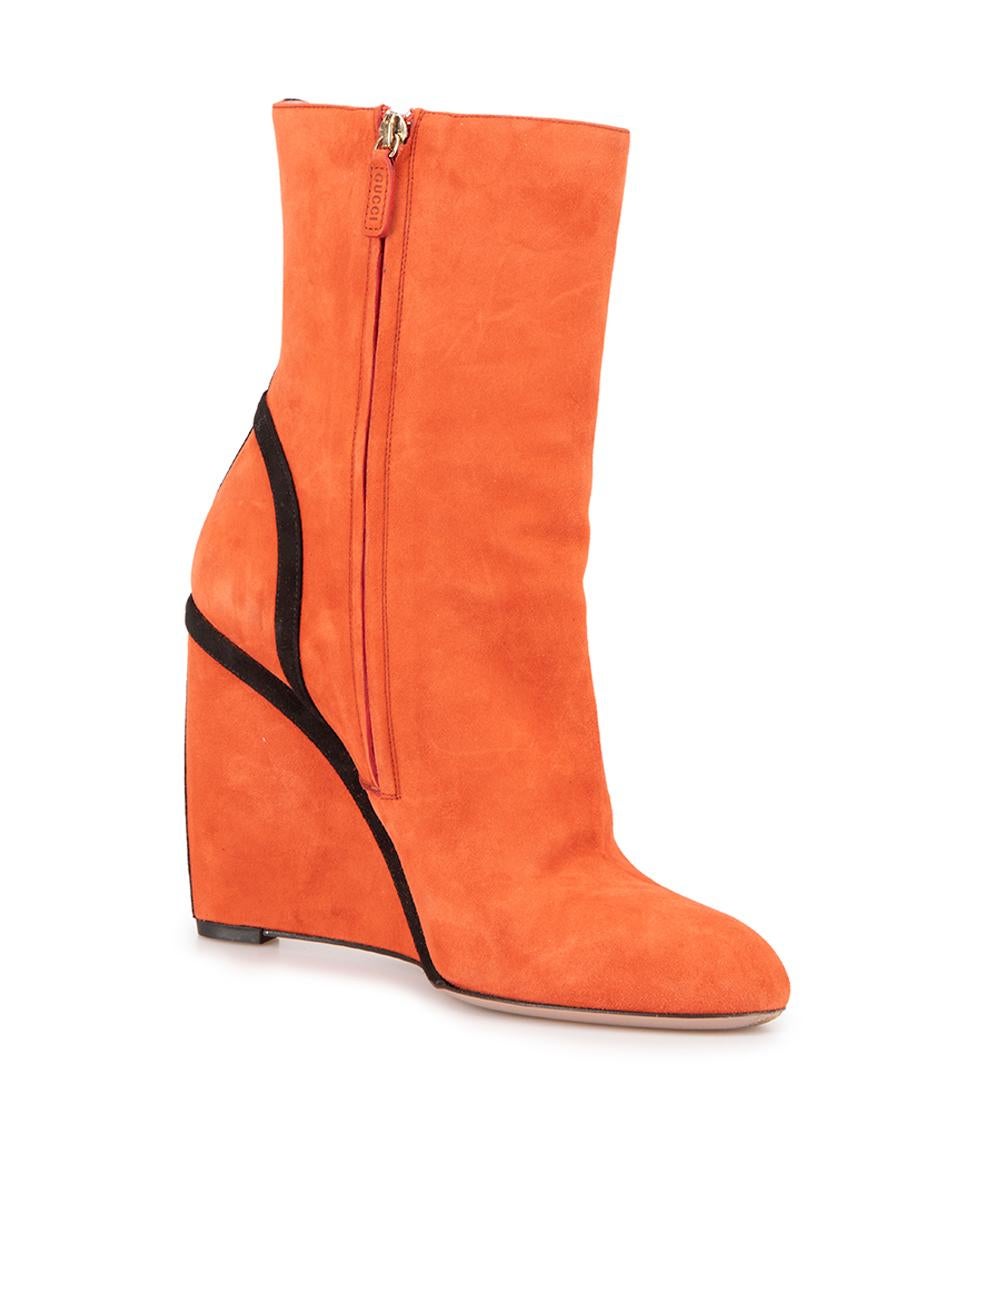 CONDITION is Very good. Minimal wear to wedge boots is evident. Minimal wear to the suede exterior which is scuffed and worn down on this used Gucci designer resale item. This item includes the original dustbag and shoebox.



Details


Orange